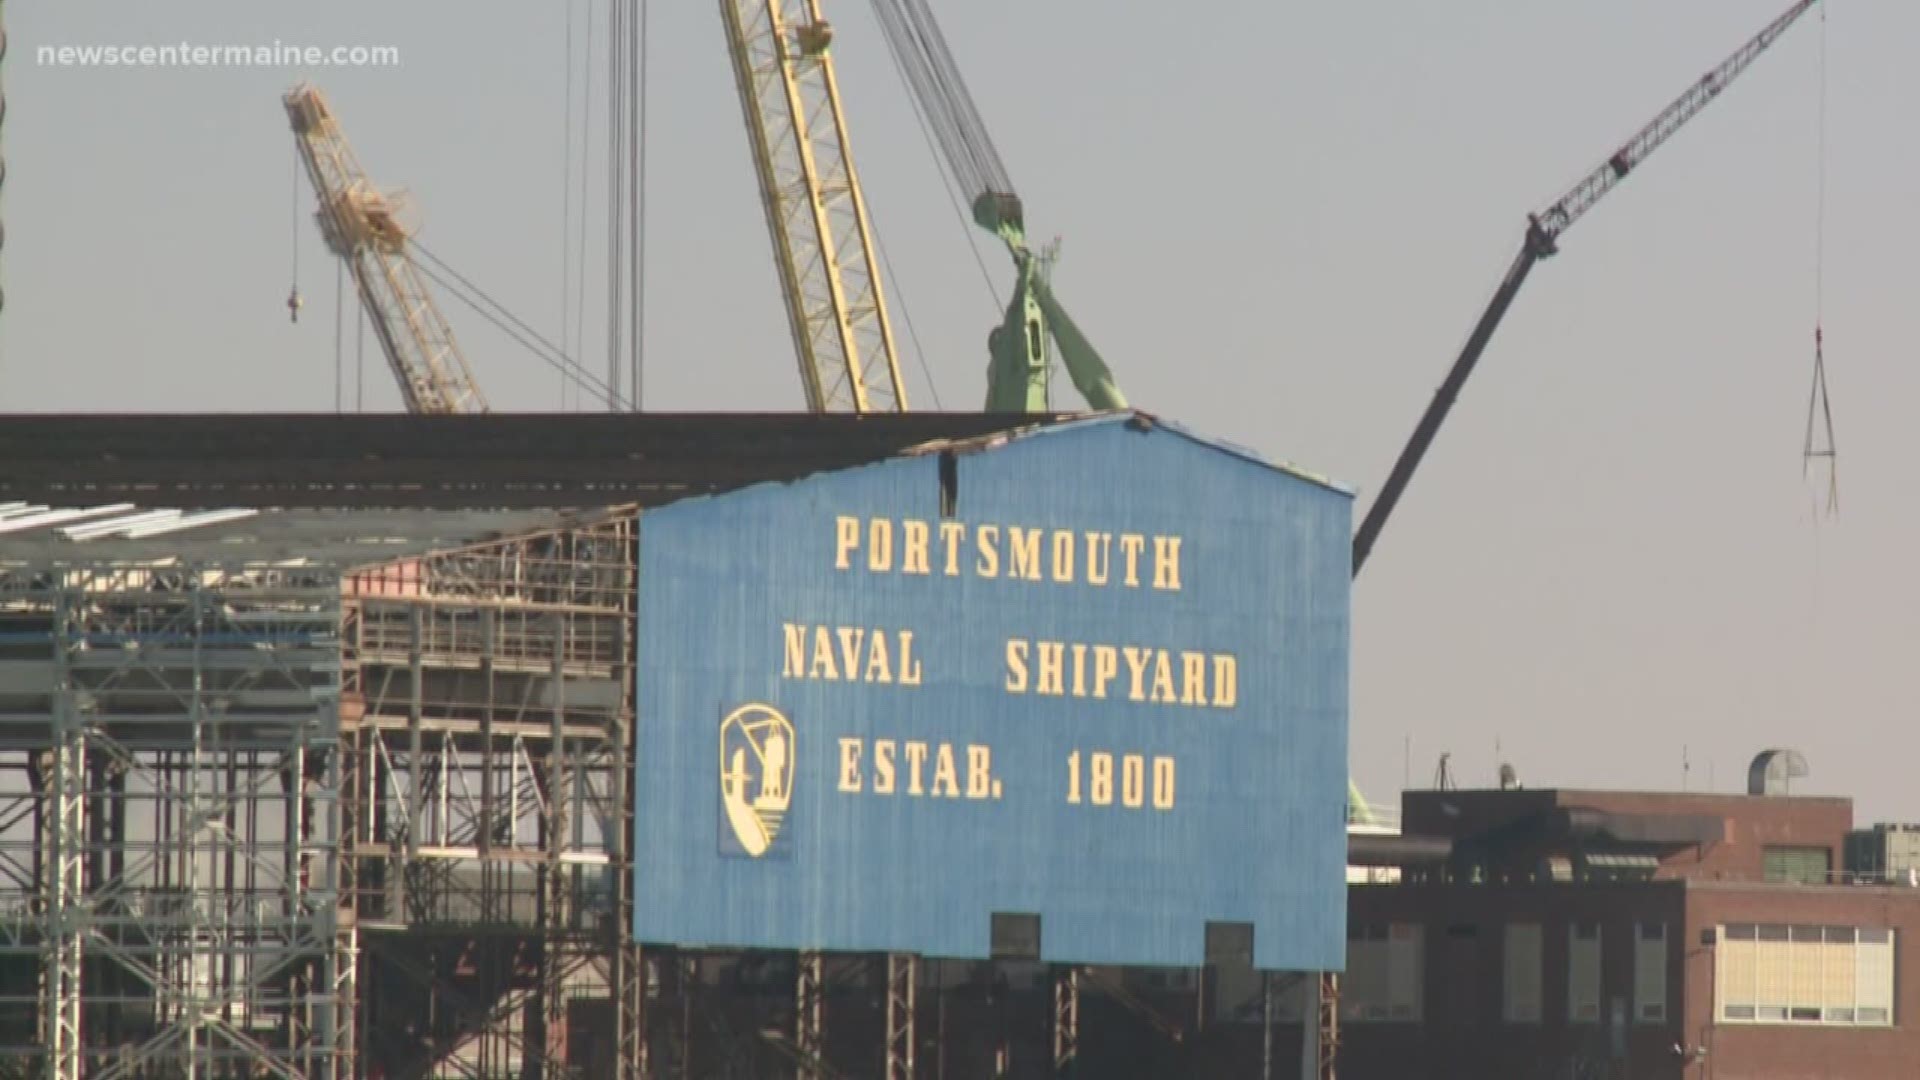 The Portsmouth Naval Shipyard could lose $150 million in order to fund President Trump's proposed border wall.